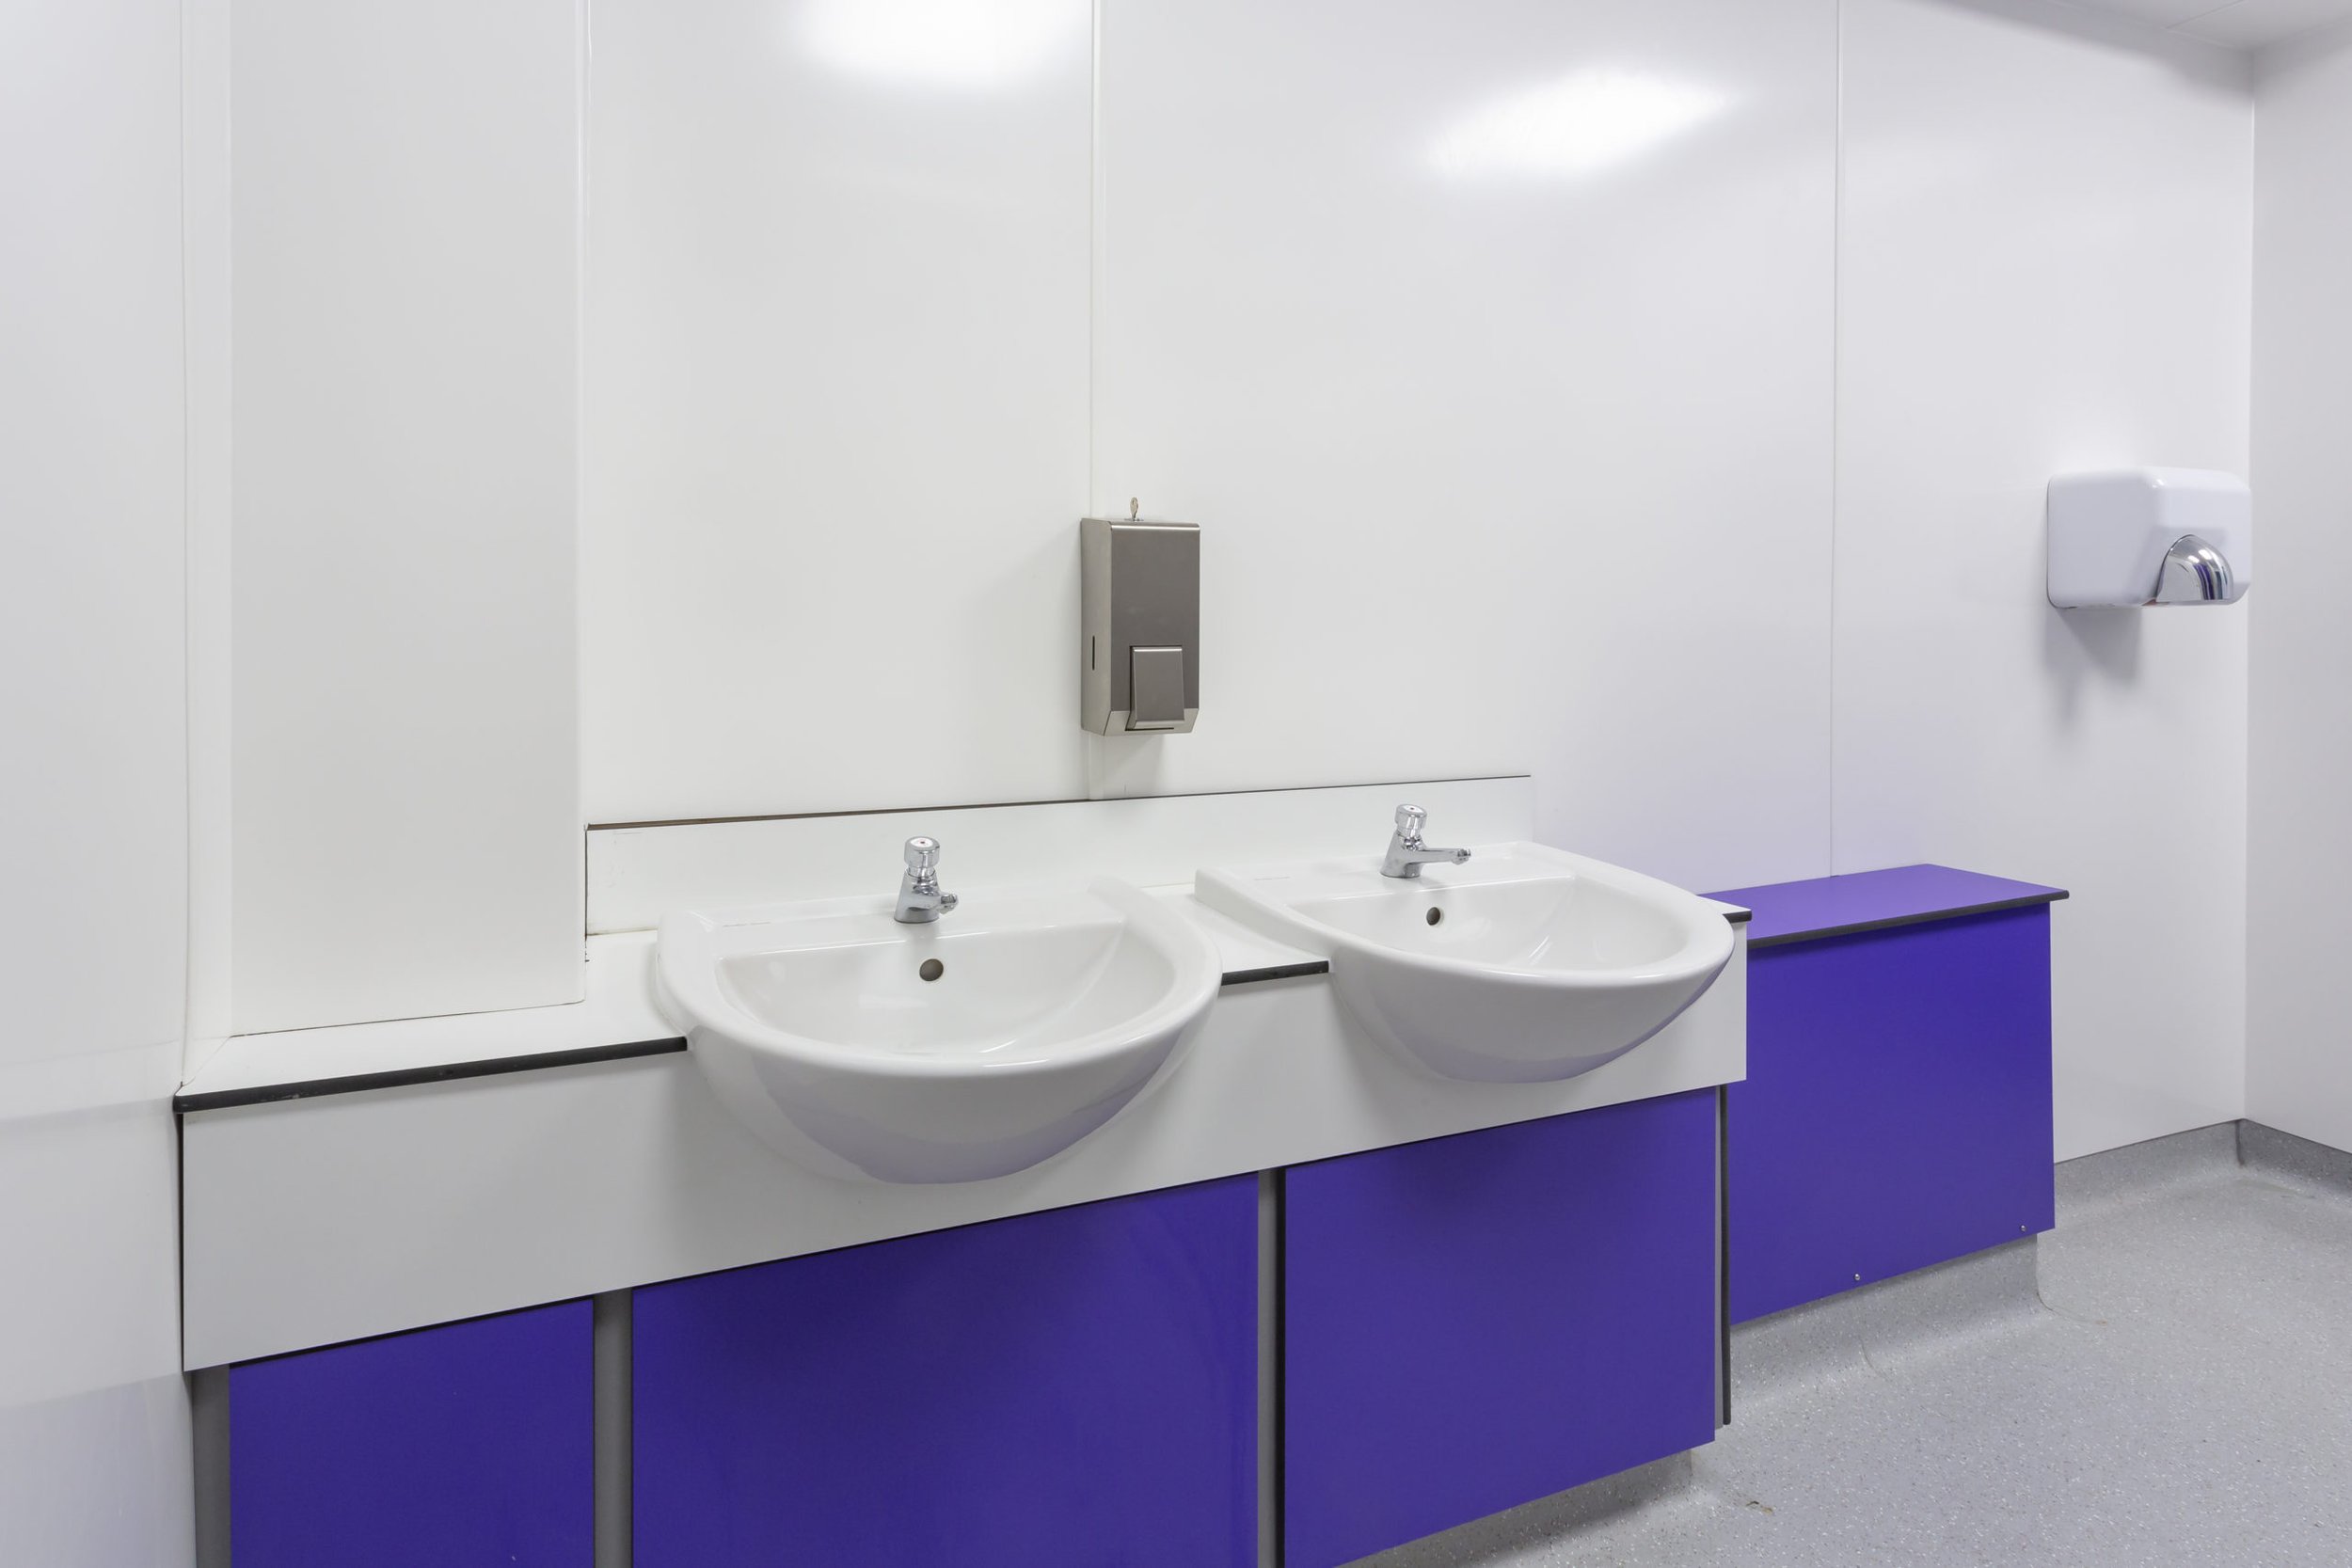 purple and white vanity unit with sinks at cliff park school.jpg